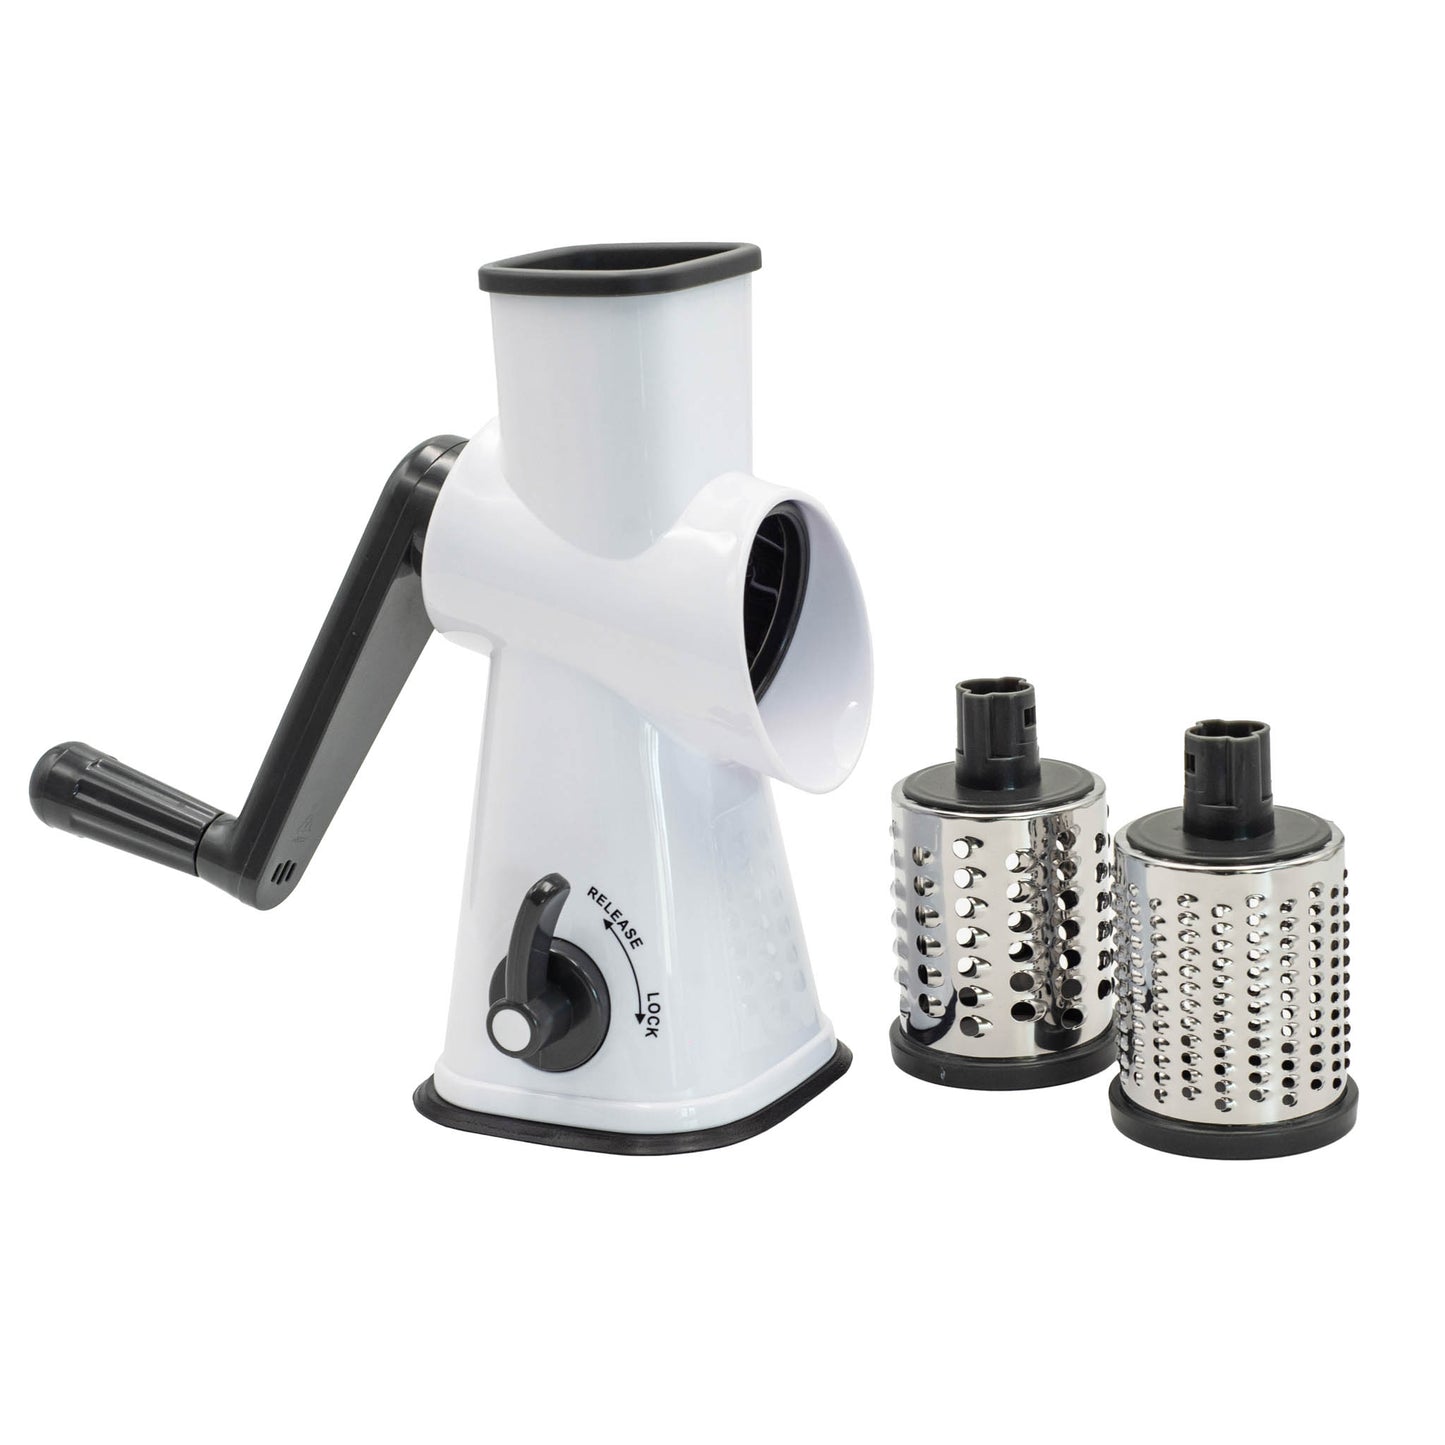 Drum grater with three drums that slice, grate and mine. Has a lockable base for secure use. 